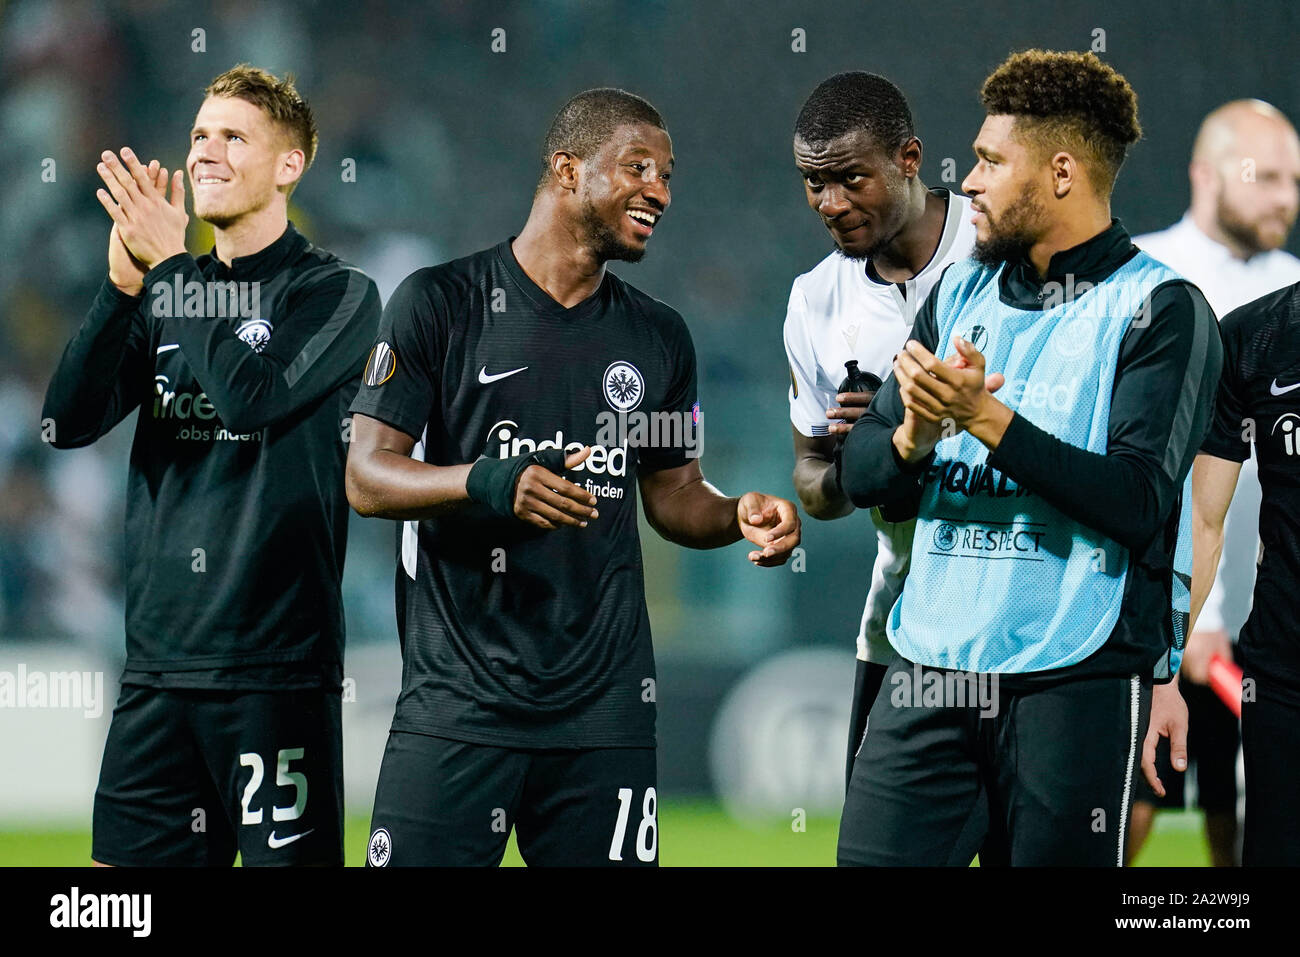 Guimaraes, Portugal. 03rd Oct, 2019. Soccer: Europa League, Vitoria Guimaraes - Eintracht Frankfurt, Group stage, Group F, 2nd matchday, at the Estadio Dom Afonso Henriques. Frankfurt's Almamy Toure (2nd from left) and Frankfurt's Evan Obite N'Dicka (2nd from right) talk. Credit: Uwe Anspach/dpa/Alamy Live News Stock Photo